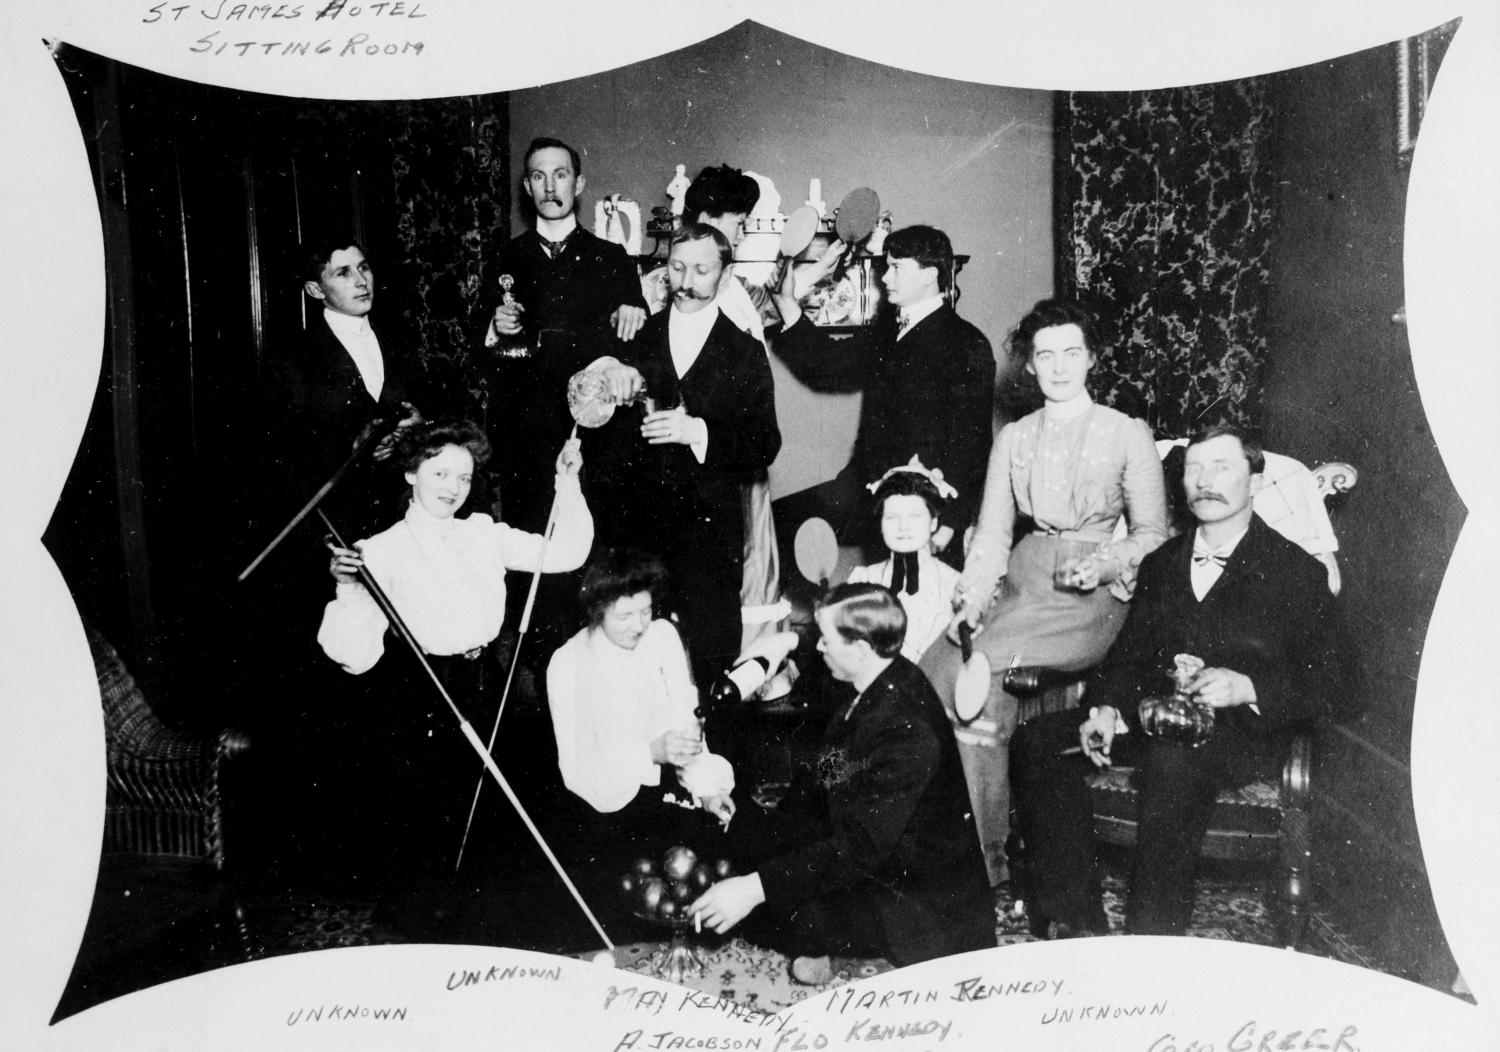 A rather merry group in the sitting room of the St. James Hotel, New Denver.